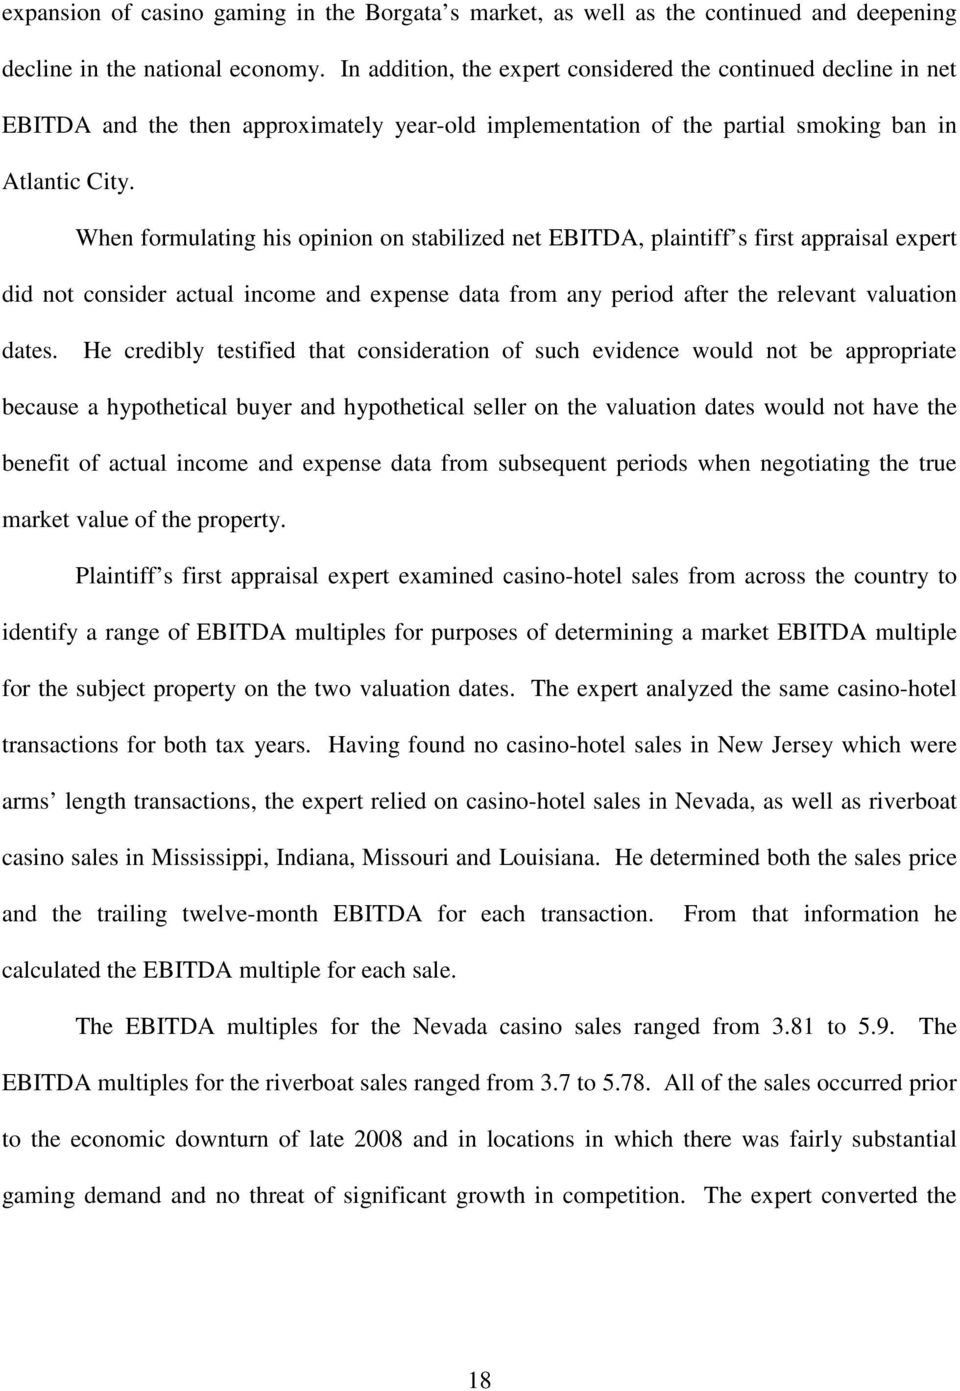 When formulating his opinion on stabilized net EBITDA, plaintiff s first appraisal expert did not consider actual income and expense data from any period after the relevant valuation dates.